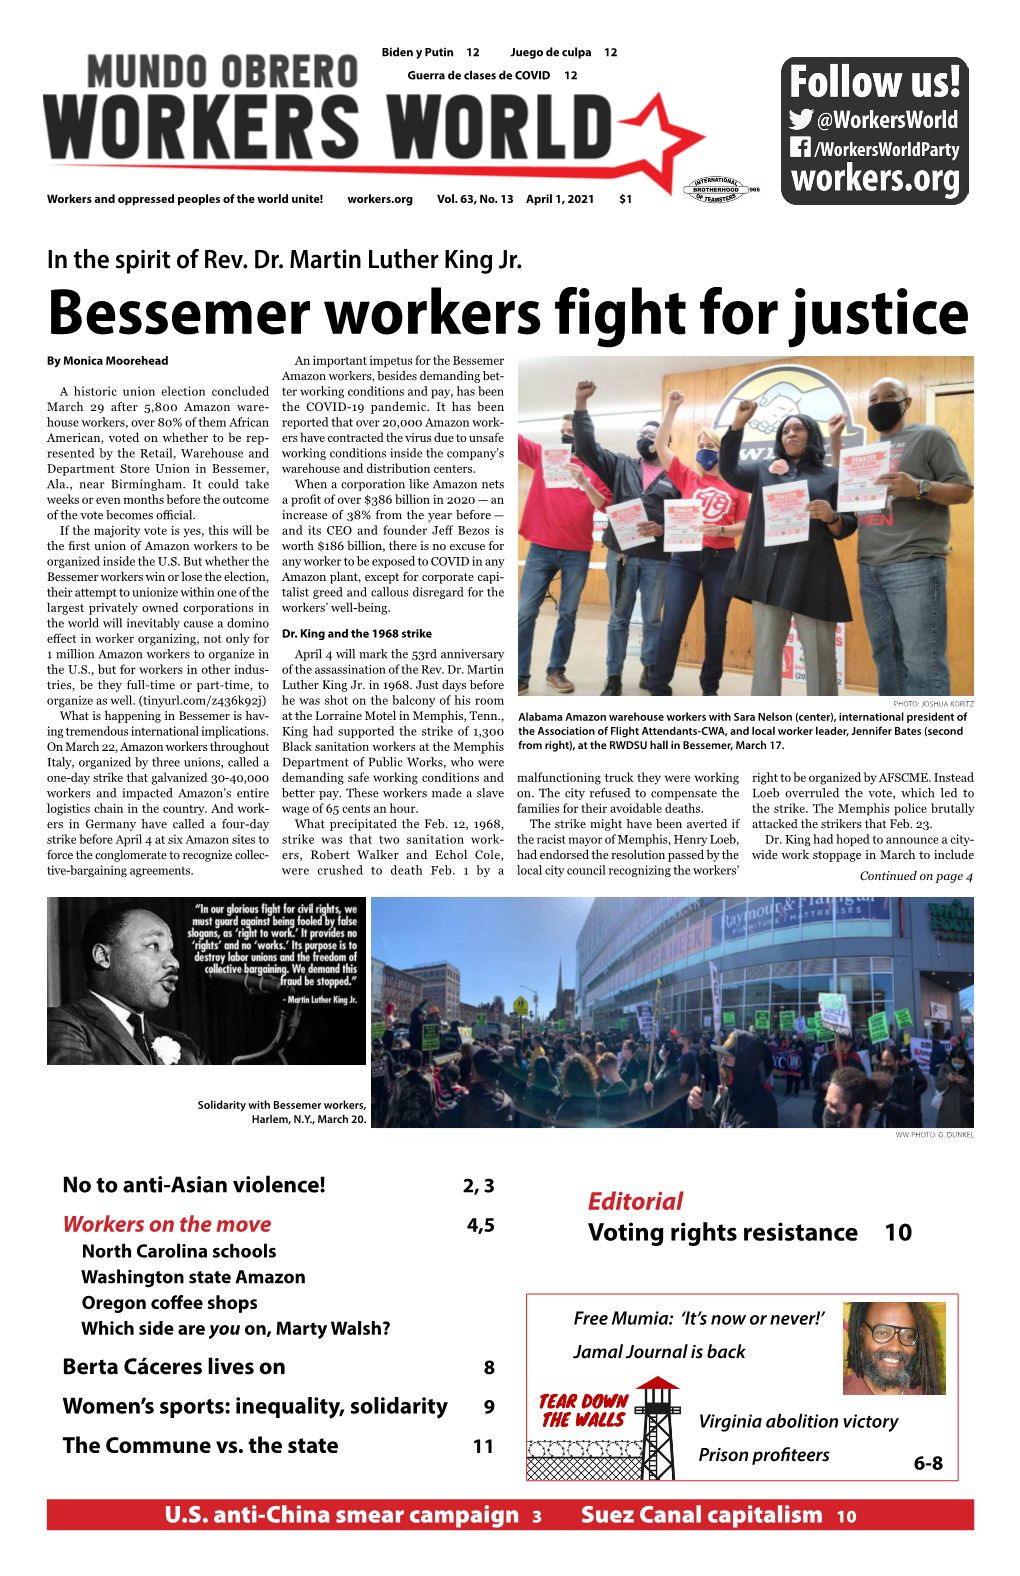 Bessemer Workers Fight for Justice